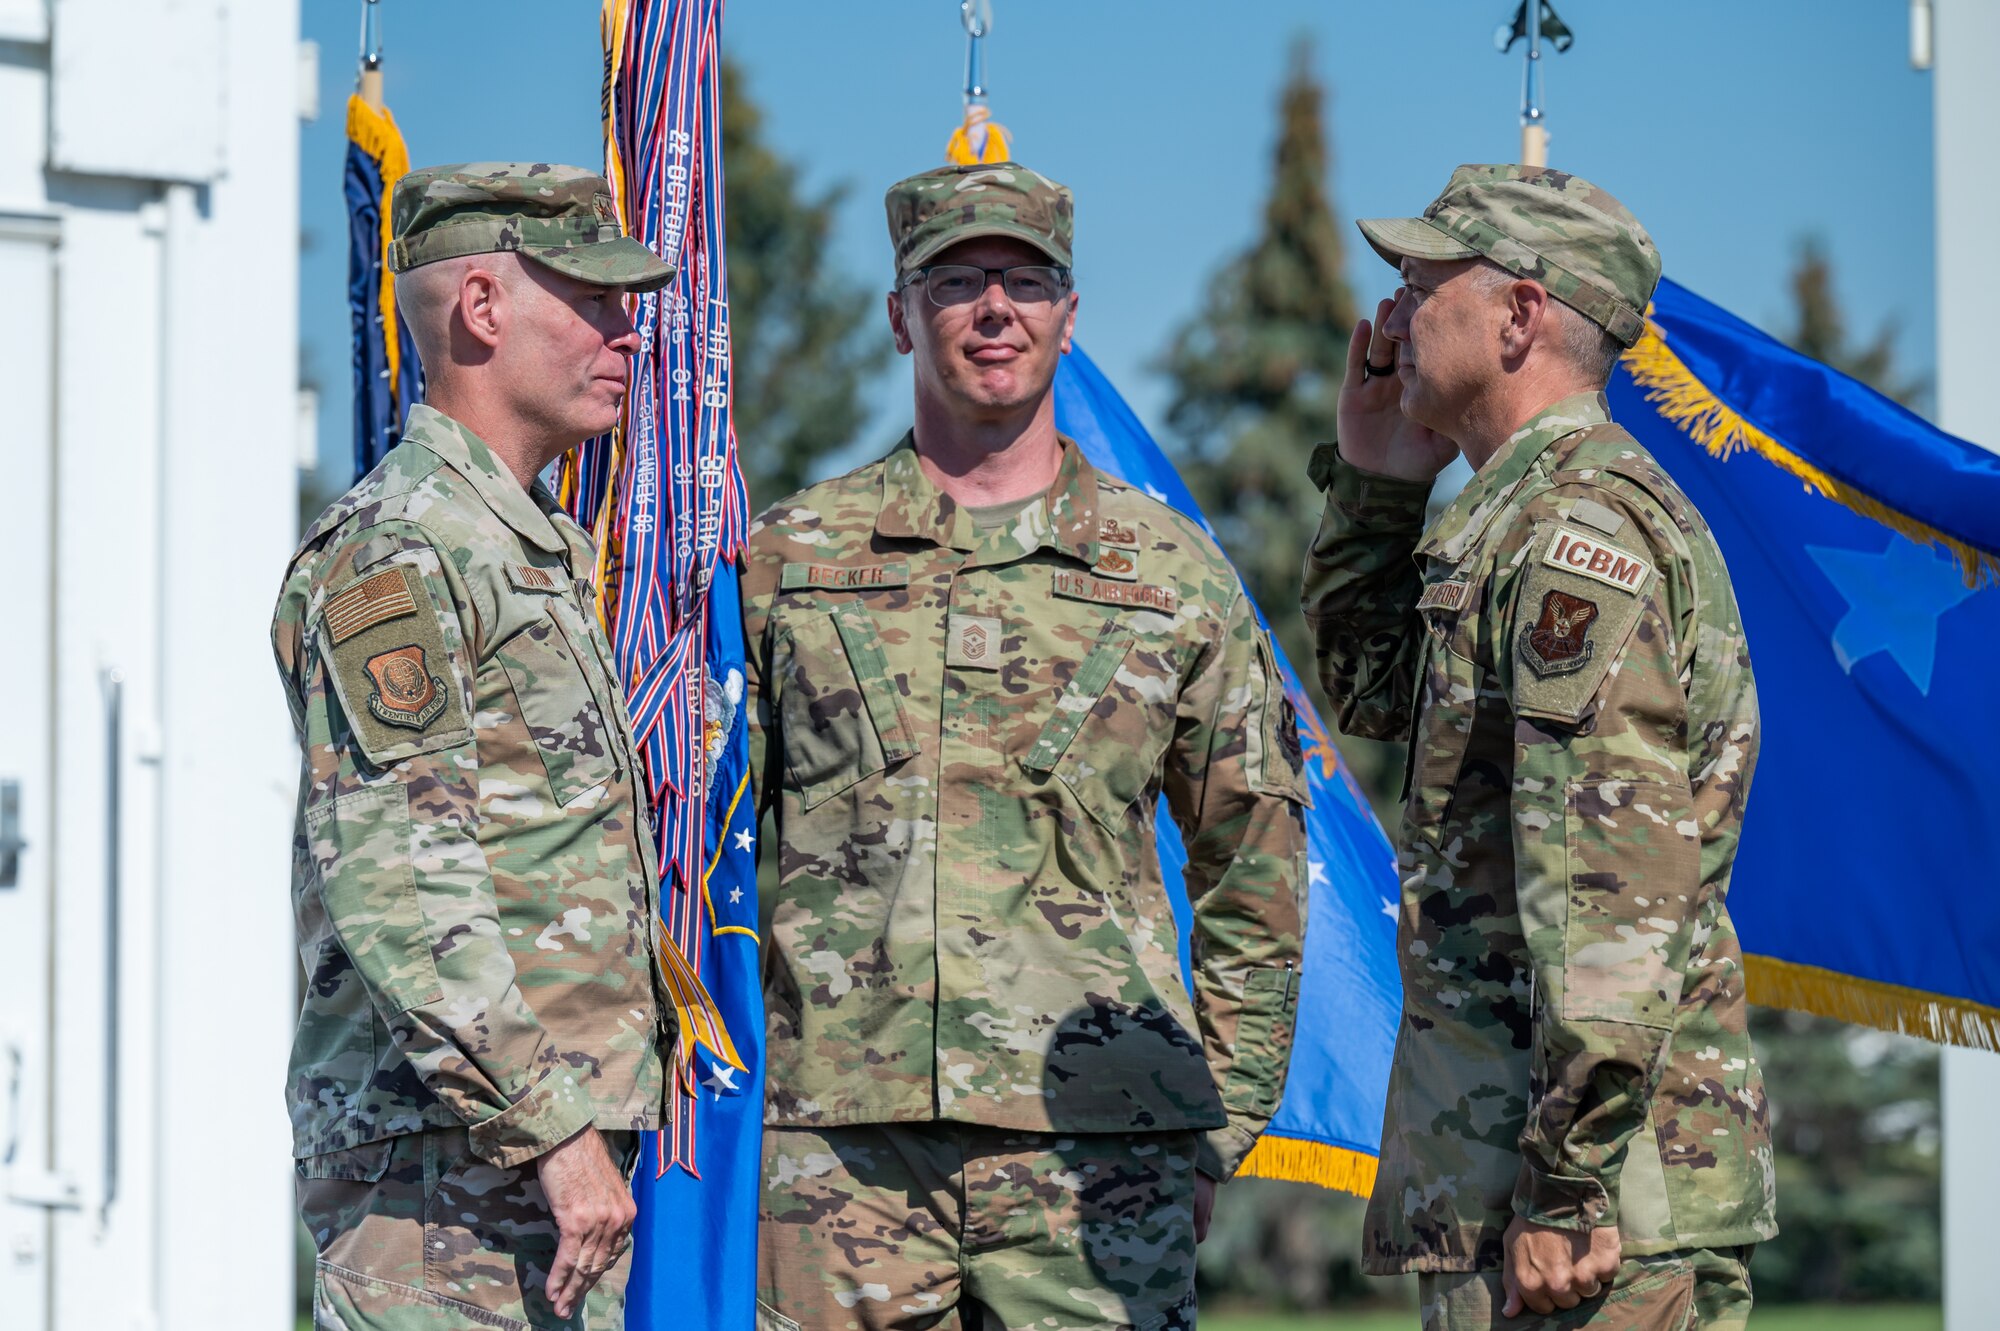 Col. Barry Little, right, accepts command of the 341st Missile Wing from Maj. Gen. Michael Lutton, left, 20th Air Force commander, while Chief Master Sgt. Michael Becker, center, 341st MW command chief and ceremony guidon bearer, looks on during a change of command ceremony July 18, 2022, at Malmstrom Air Force Base, Mont.